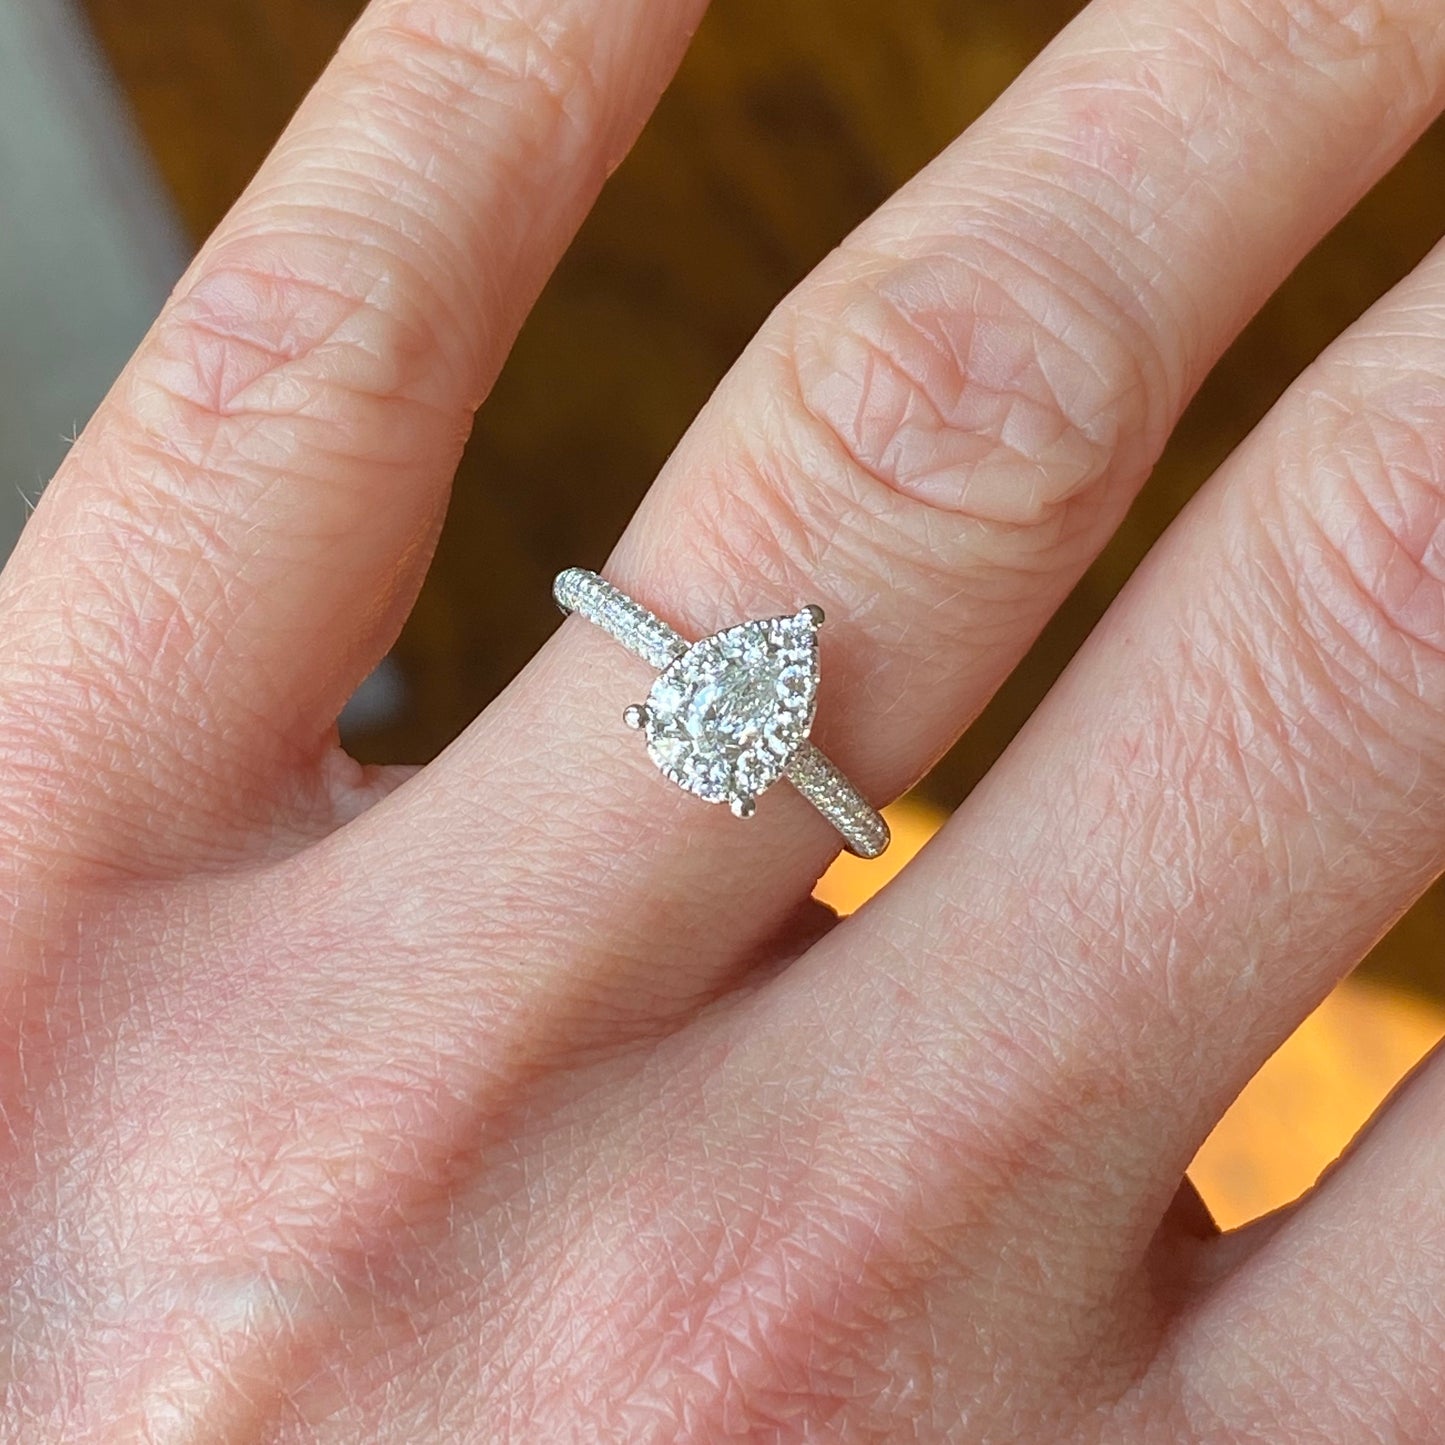 This pear cluster diamond engagement ring  is a complete classic.  Its simplicity is so romantic. The Details... One 18ct white gold diamond engagement ring.  Diamond halo cluster in an pear shape with pavé diamond-set shoulders. 0.74ct in total of diamonds.  Colour G.  Clarity VS. Centre stone: 0.22ct Melée: 0.52ct 18ct white gold.  Size M